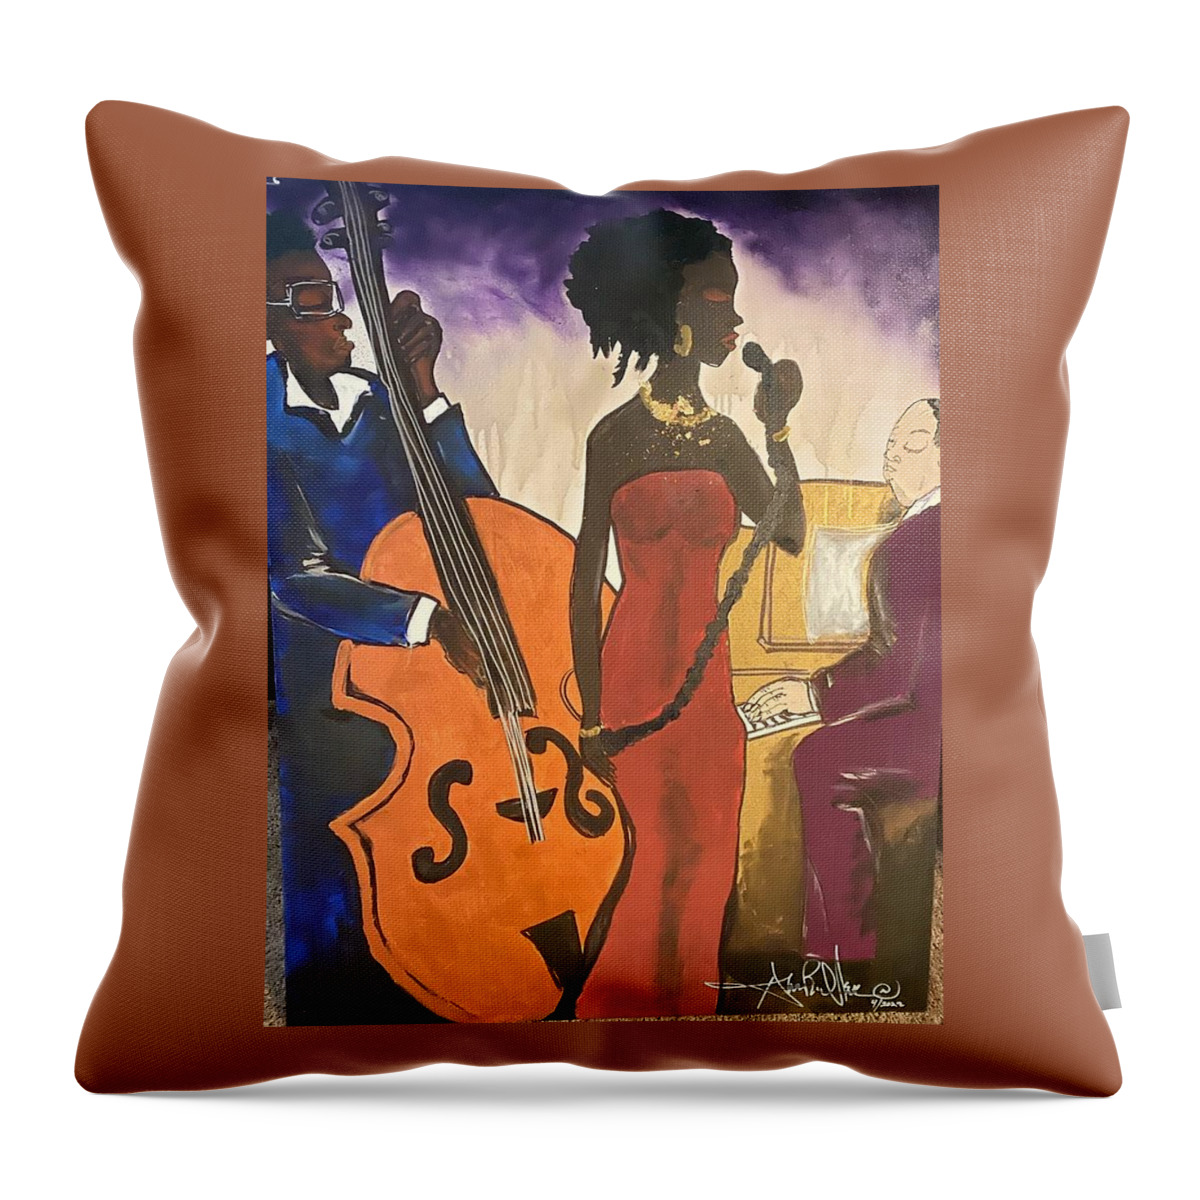  Throw Pillow featuring the painting Mo JAZZ by Angie ONeal